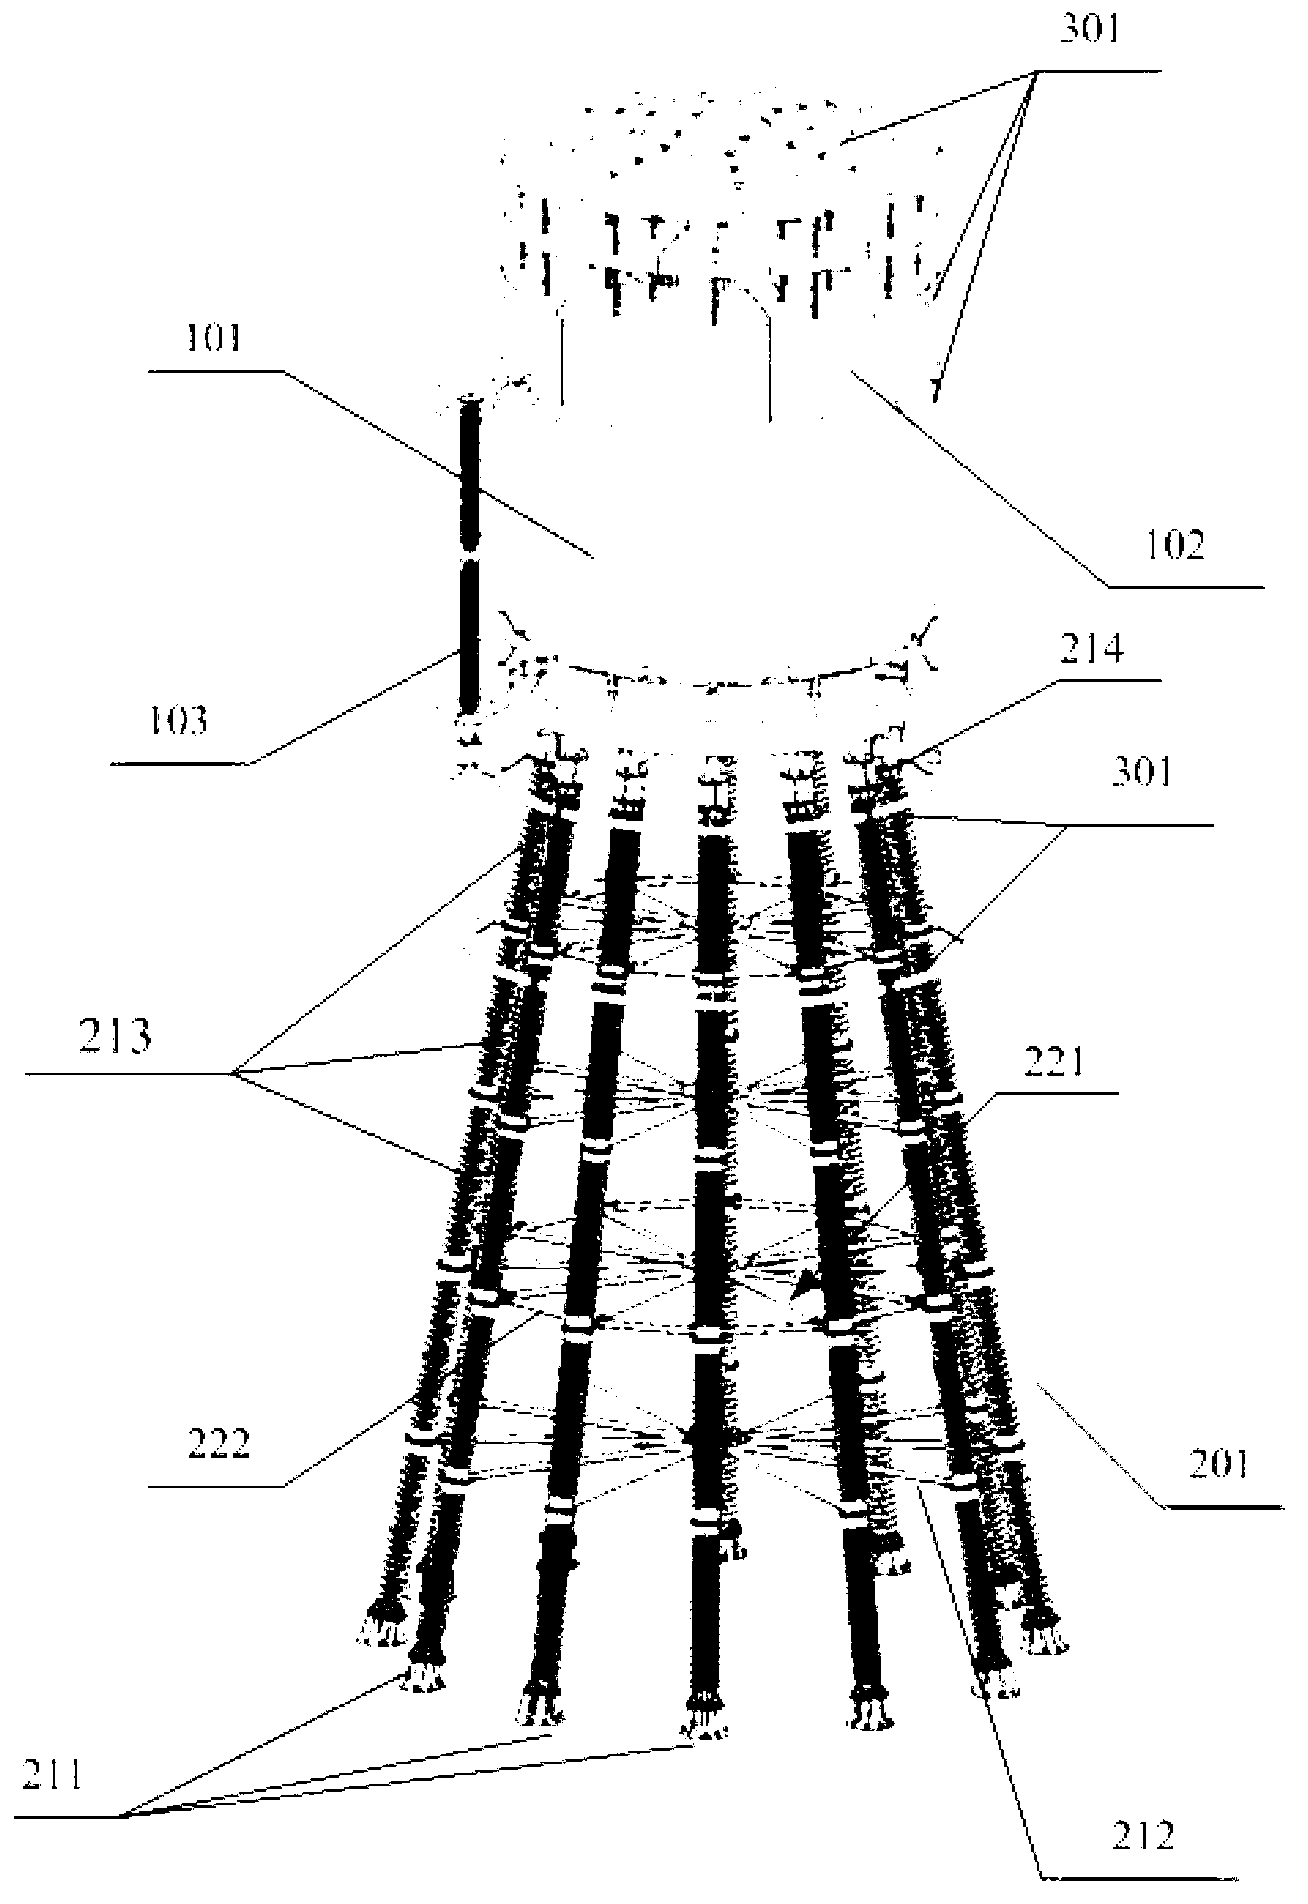 Extra-high-voltage dry hollow smoothing reactor